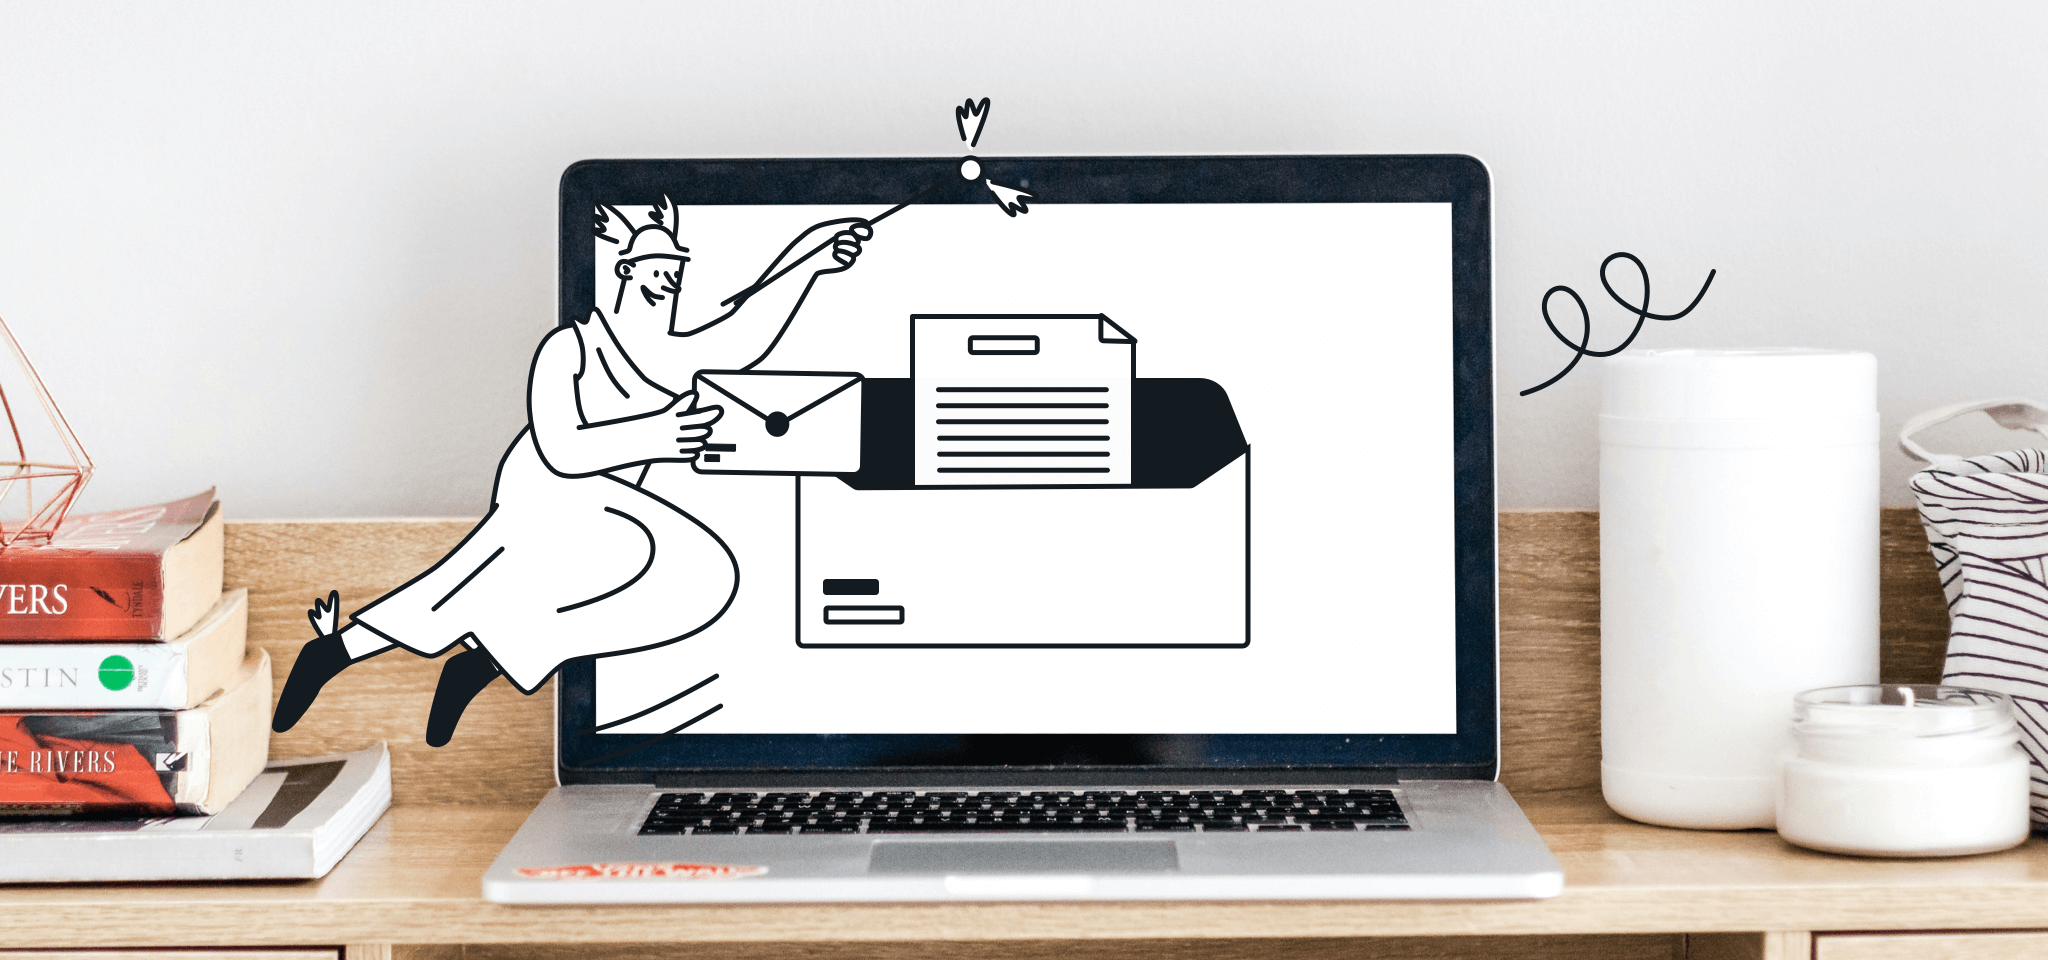 Hermes holds an email in front of the laptop screen